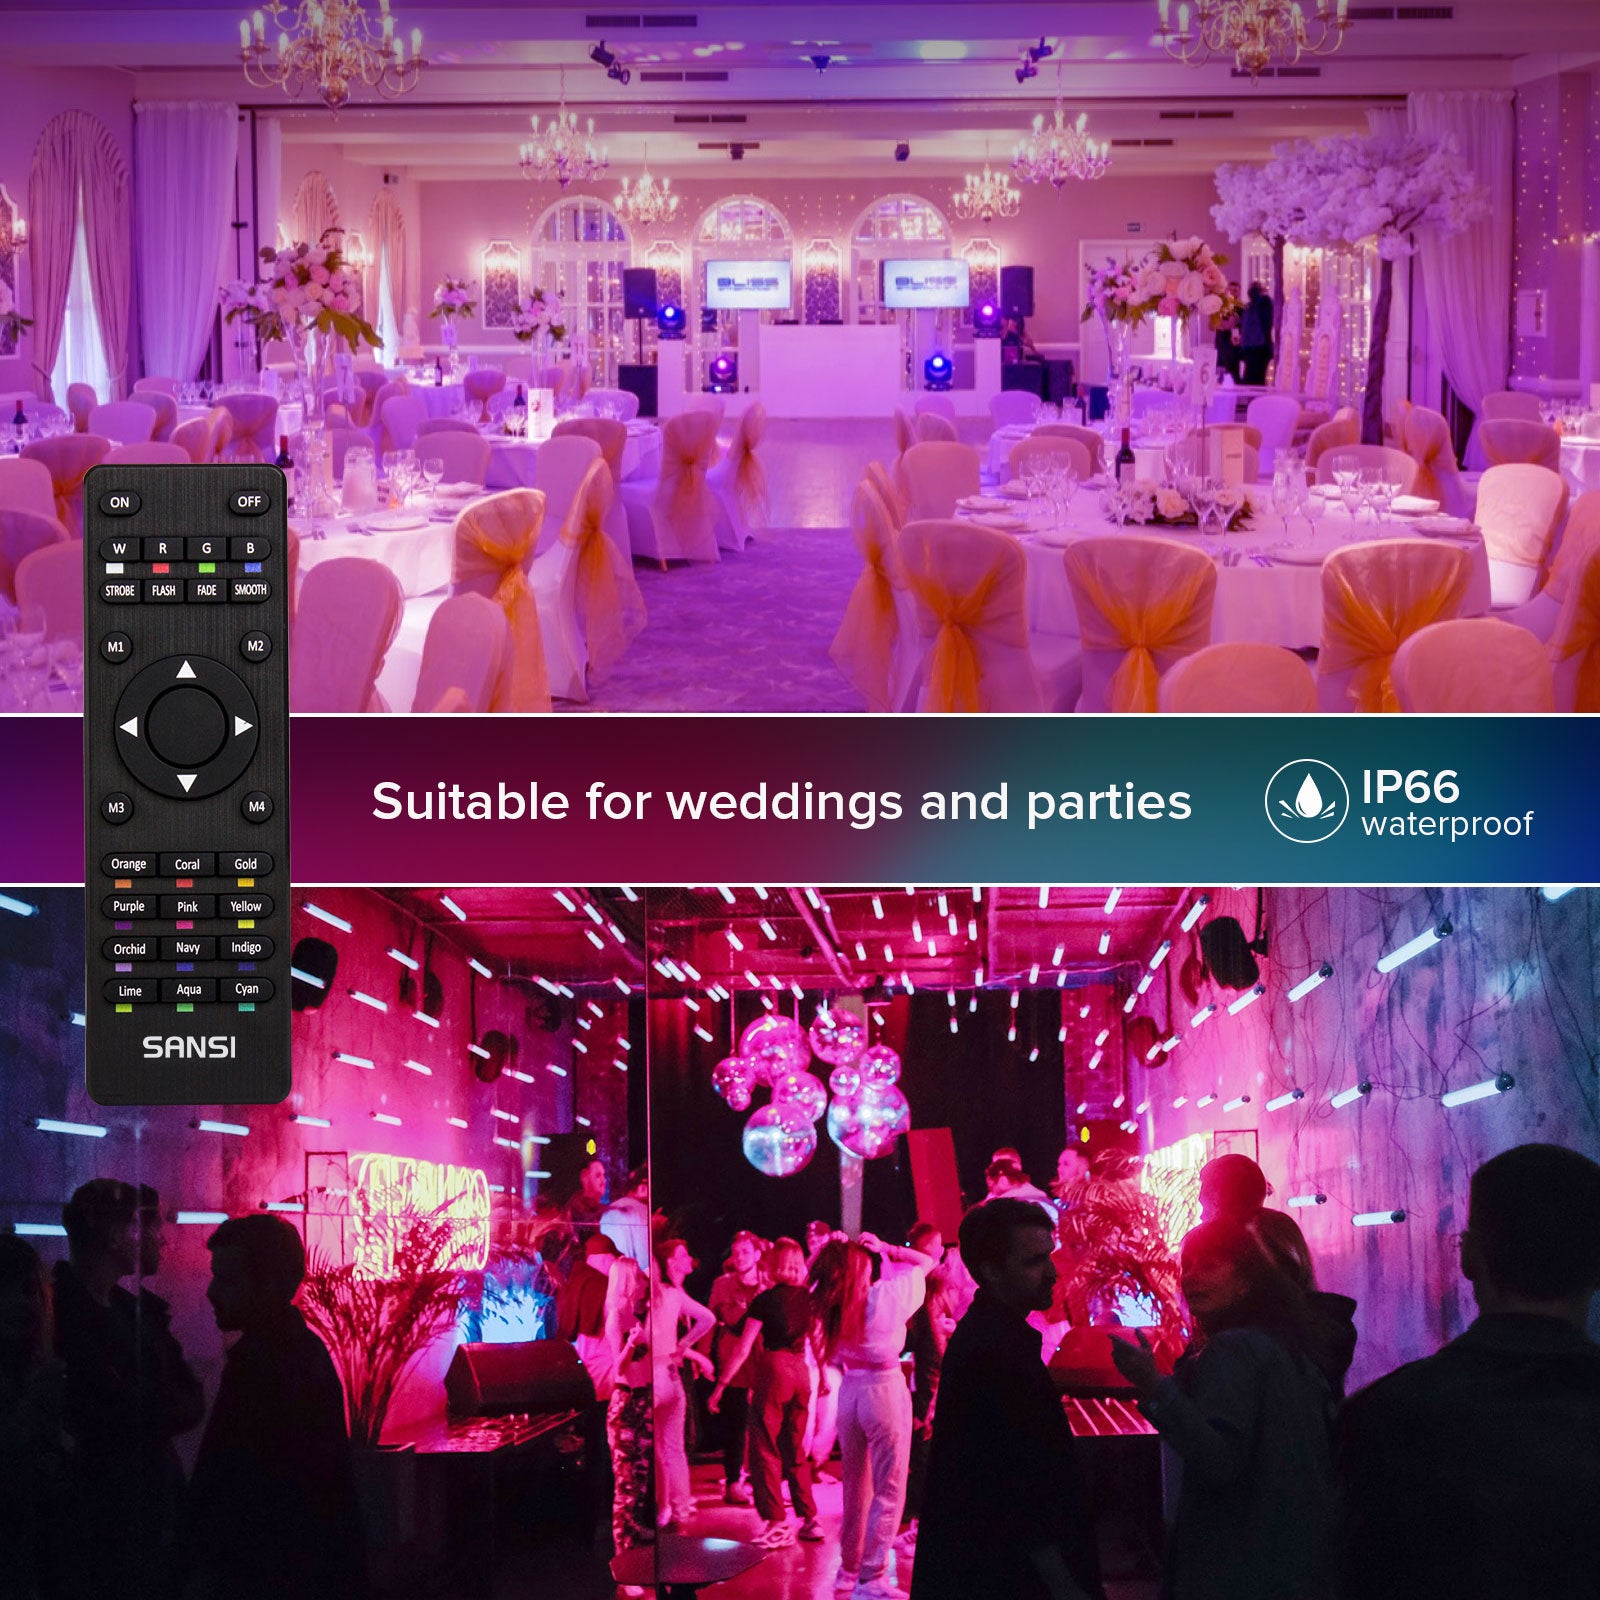 Upgraded 20W RGB LED Flood Light (US ONLY) is IP66 waterproof，which is suitable for weddings and parties.